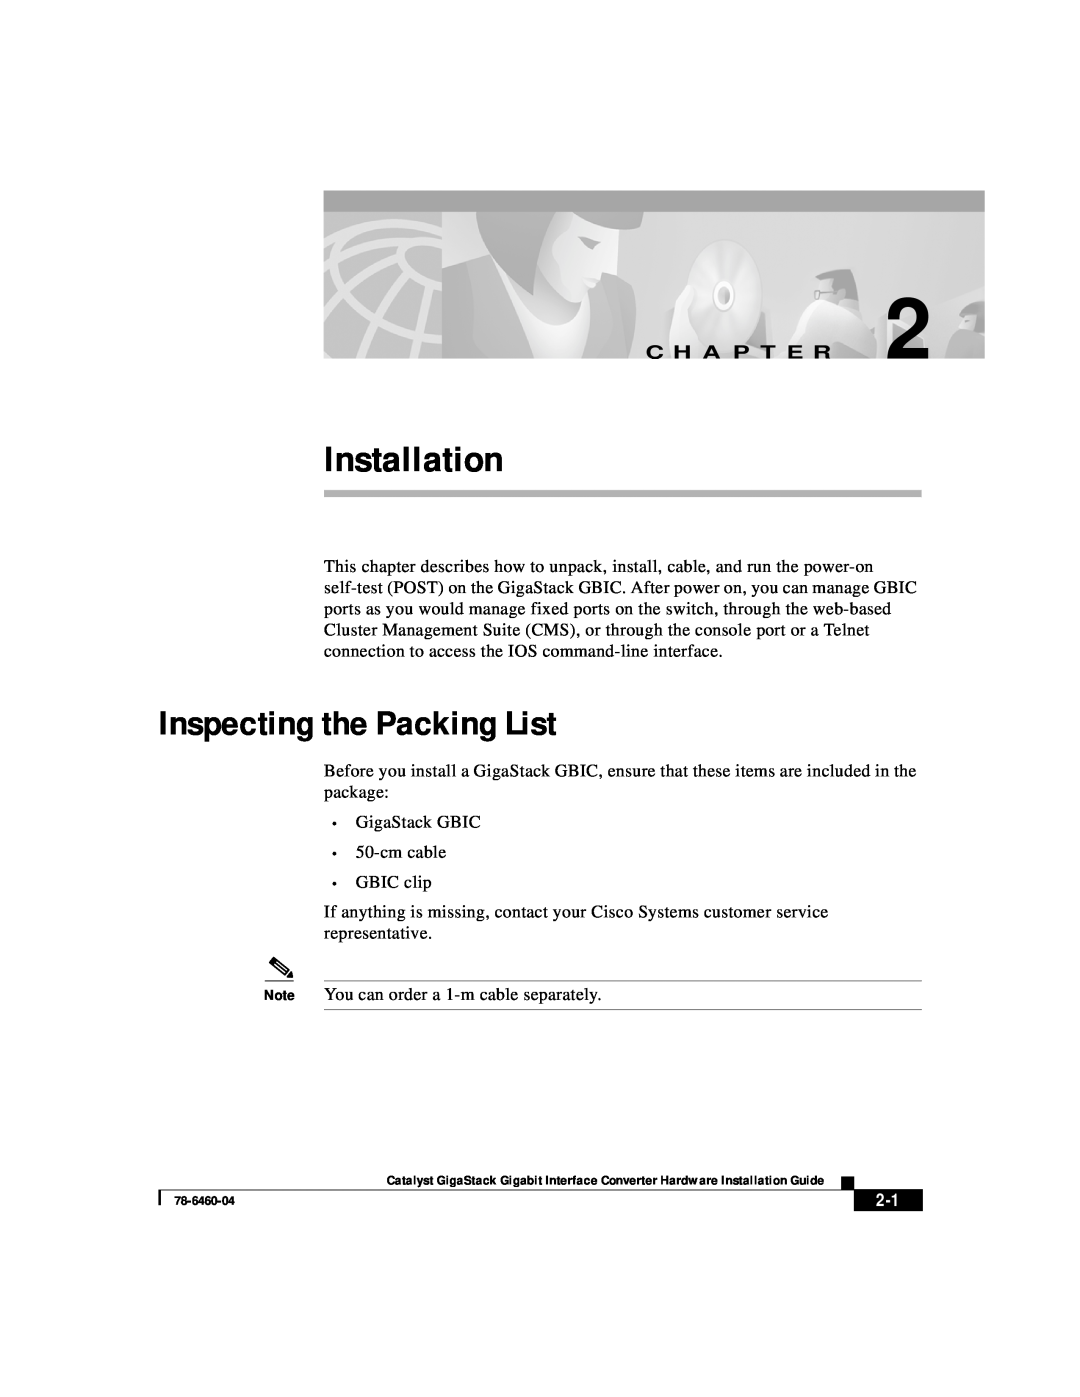 Cisco Systems WS-X3500-XL manual Installation, Inspecting the Packing List, C H A P T E R 